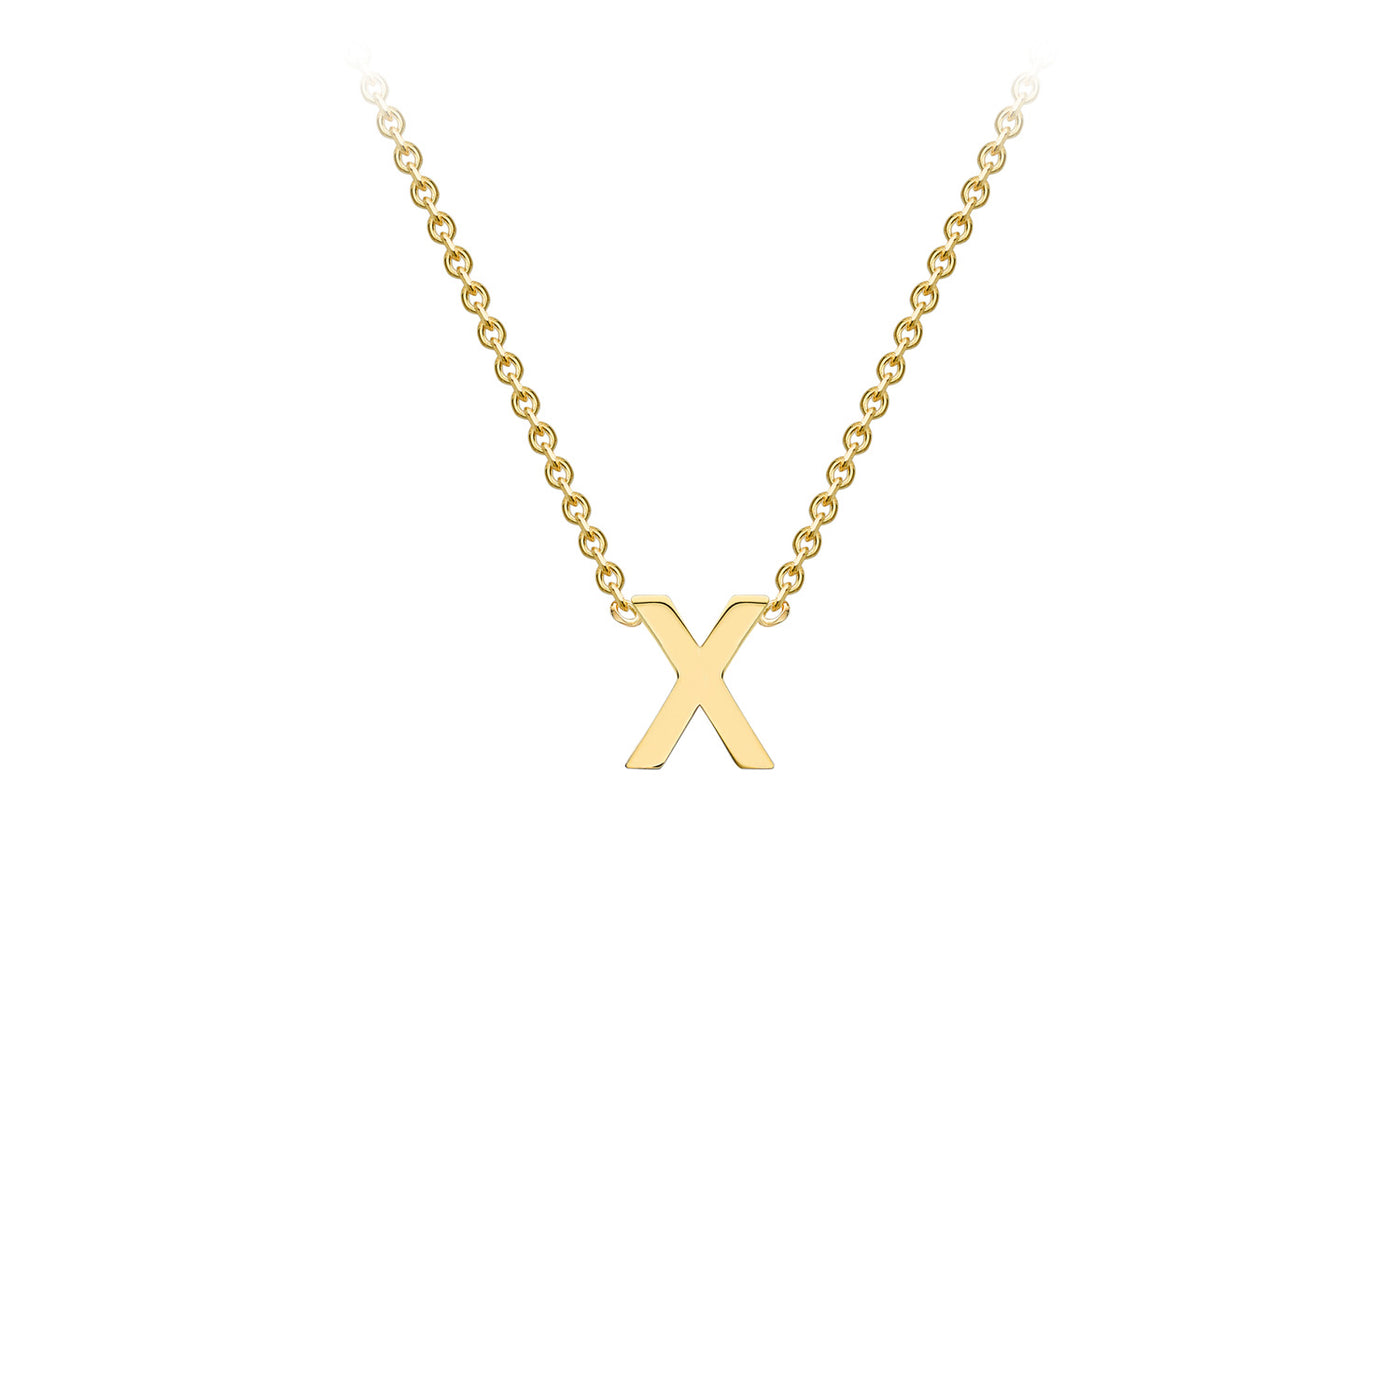 9ct Gold Petite Initial Necklace - Pre Order - Ships within 5 days.